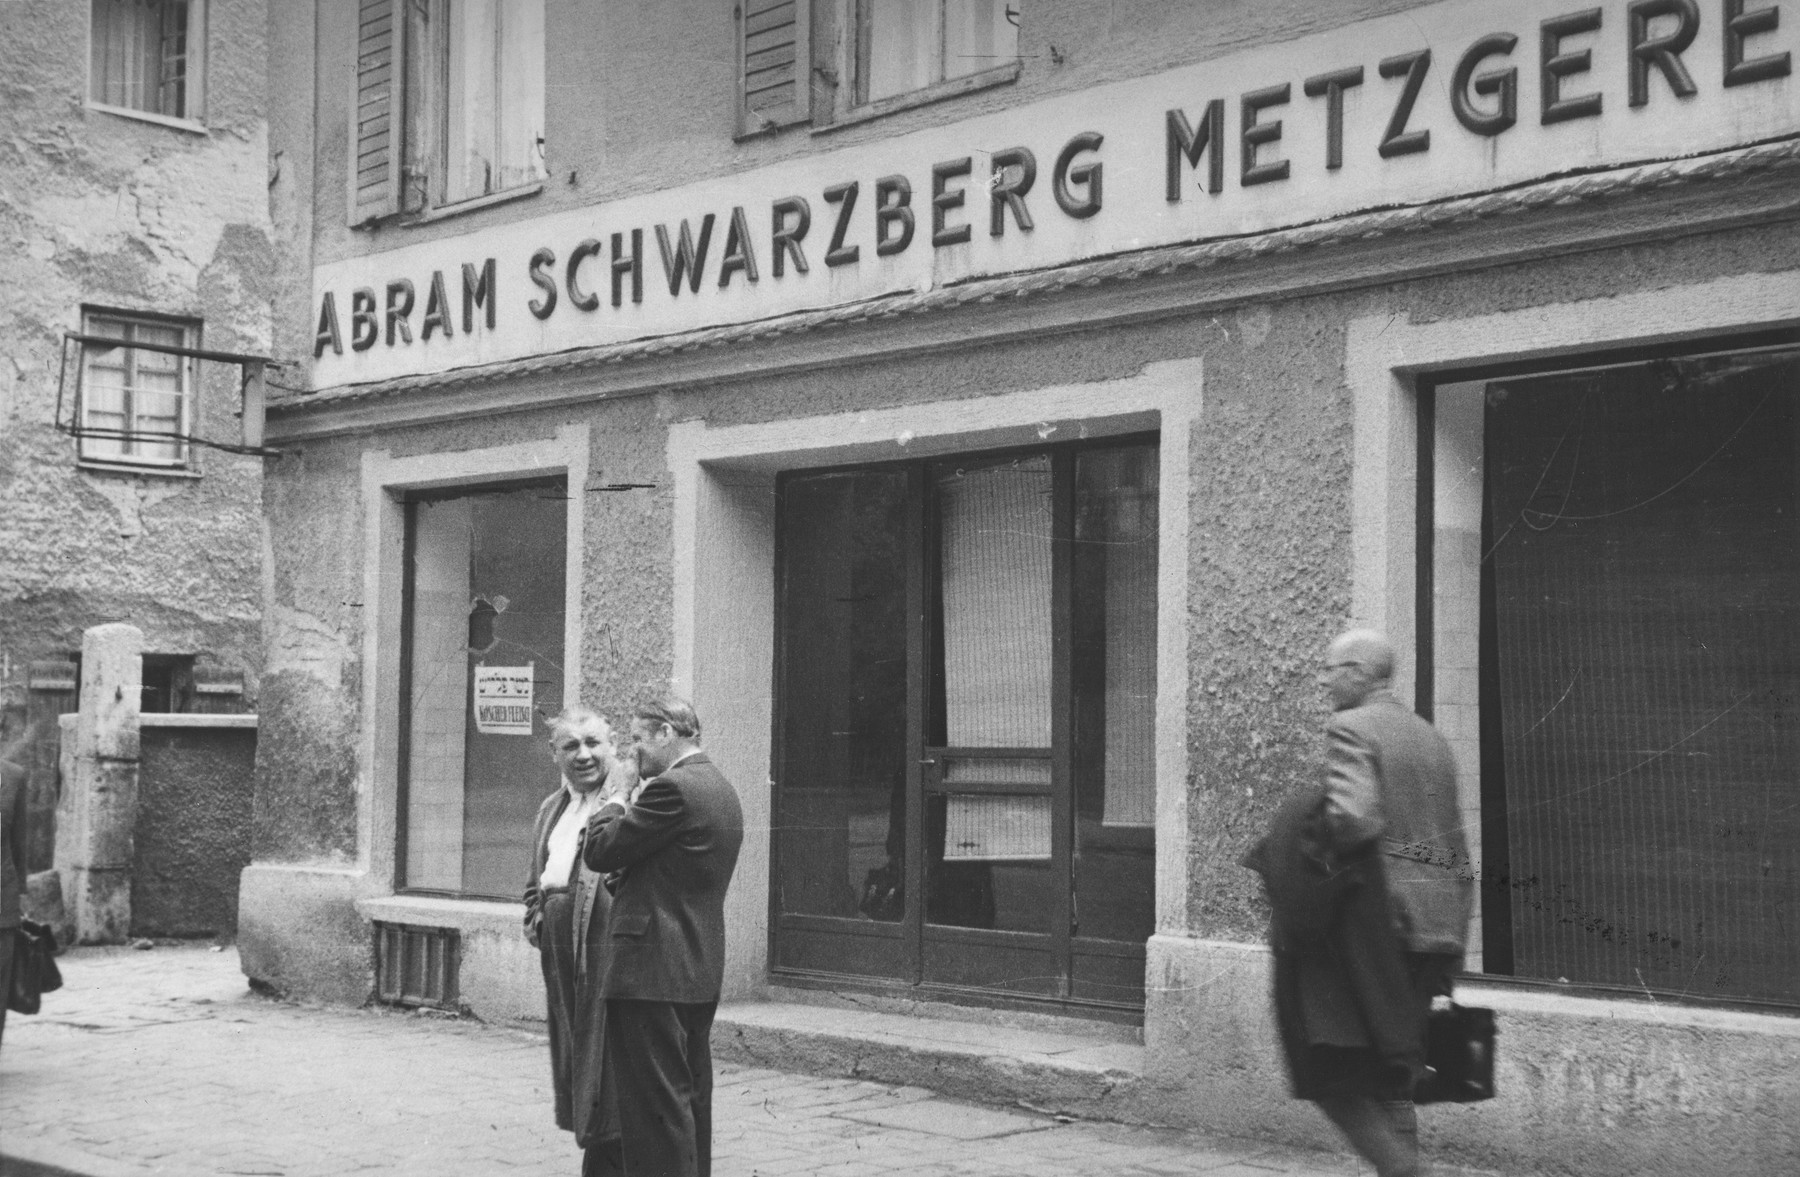 Two men stand outside a kosher butcher shop on the Ismaningerstrasse in Munich that was vandalized in an anti-Semitic attack.